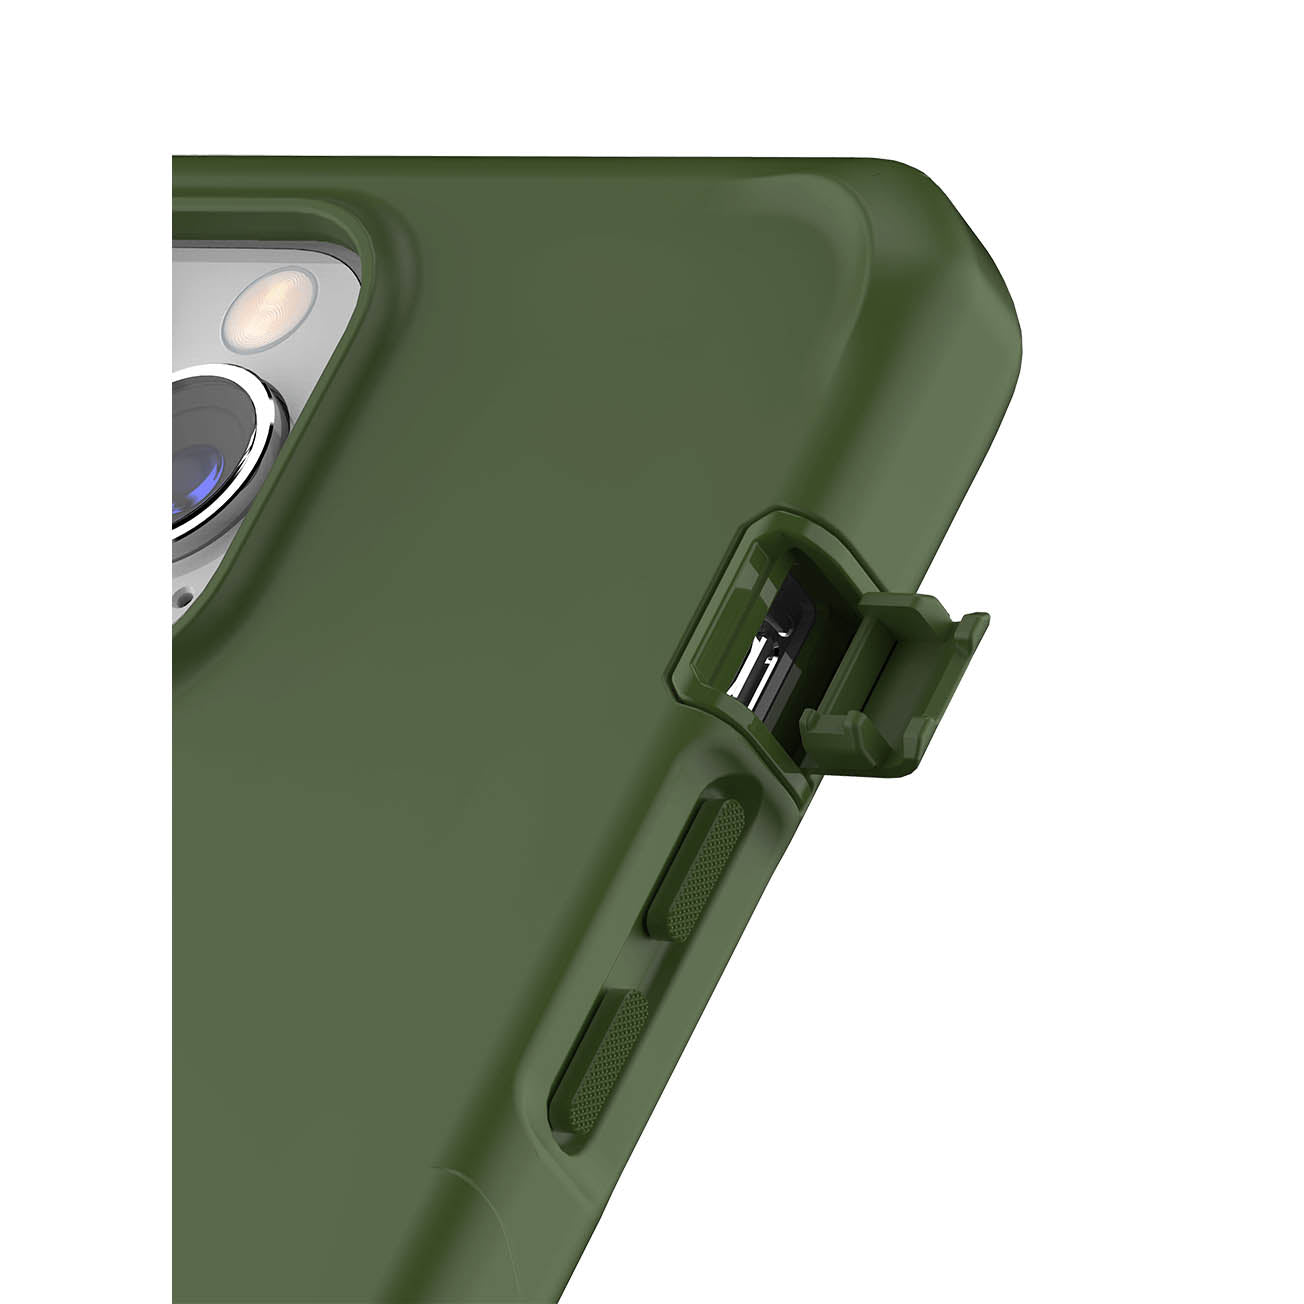 ITSKINS Supreme Solid Case For iPhone 13 Pro Max / 12 Pro Max - Olive Green